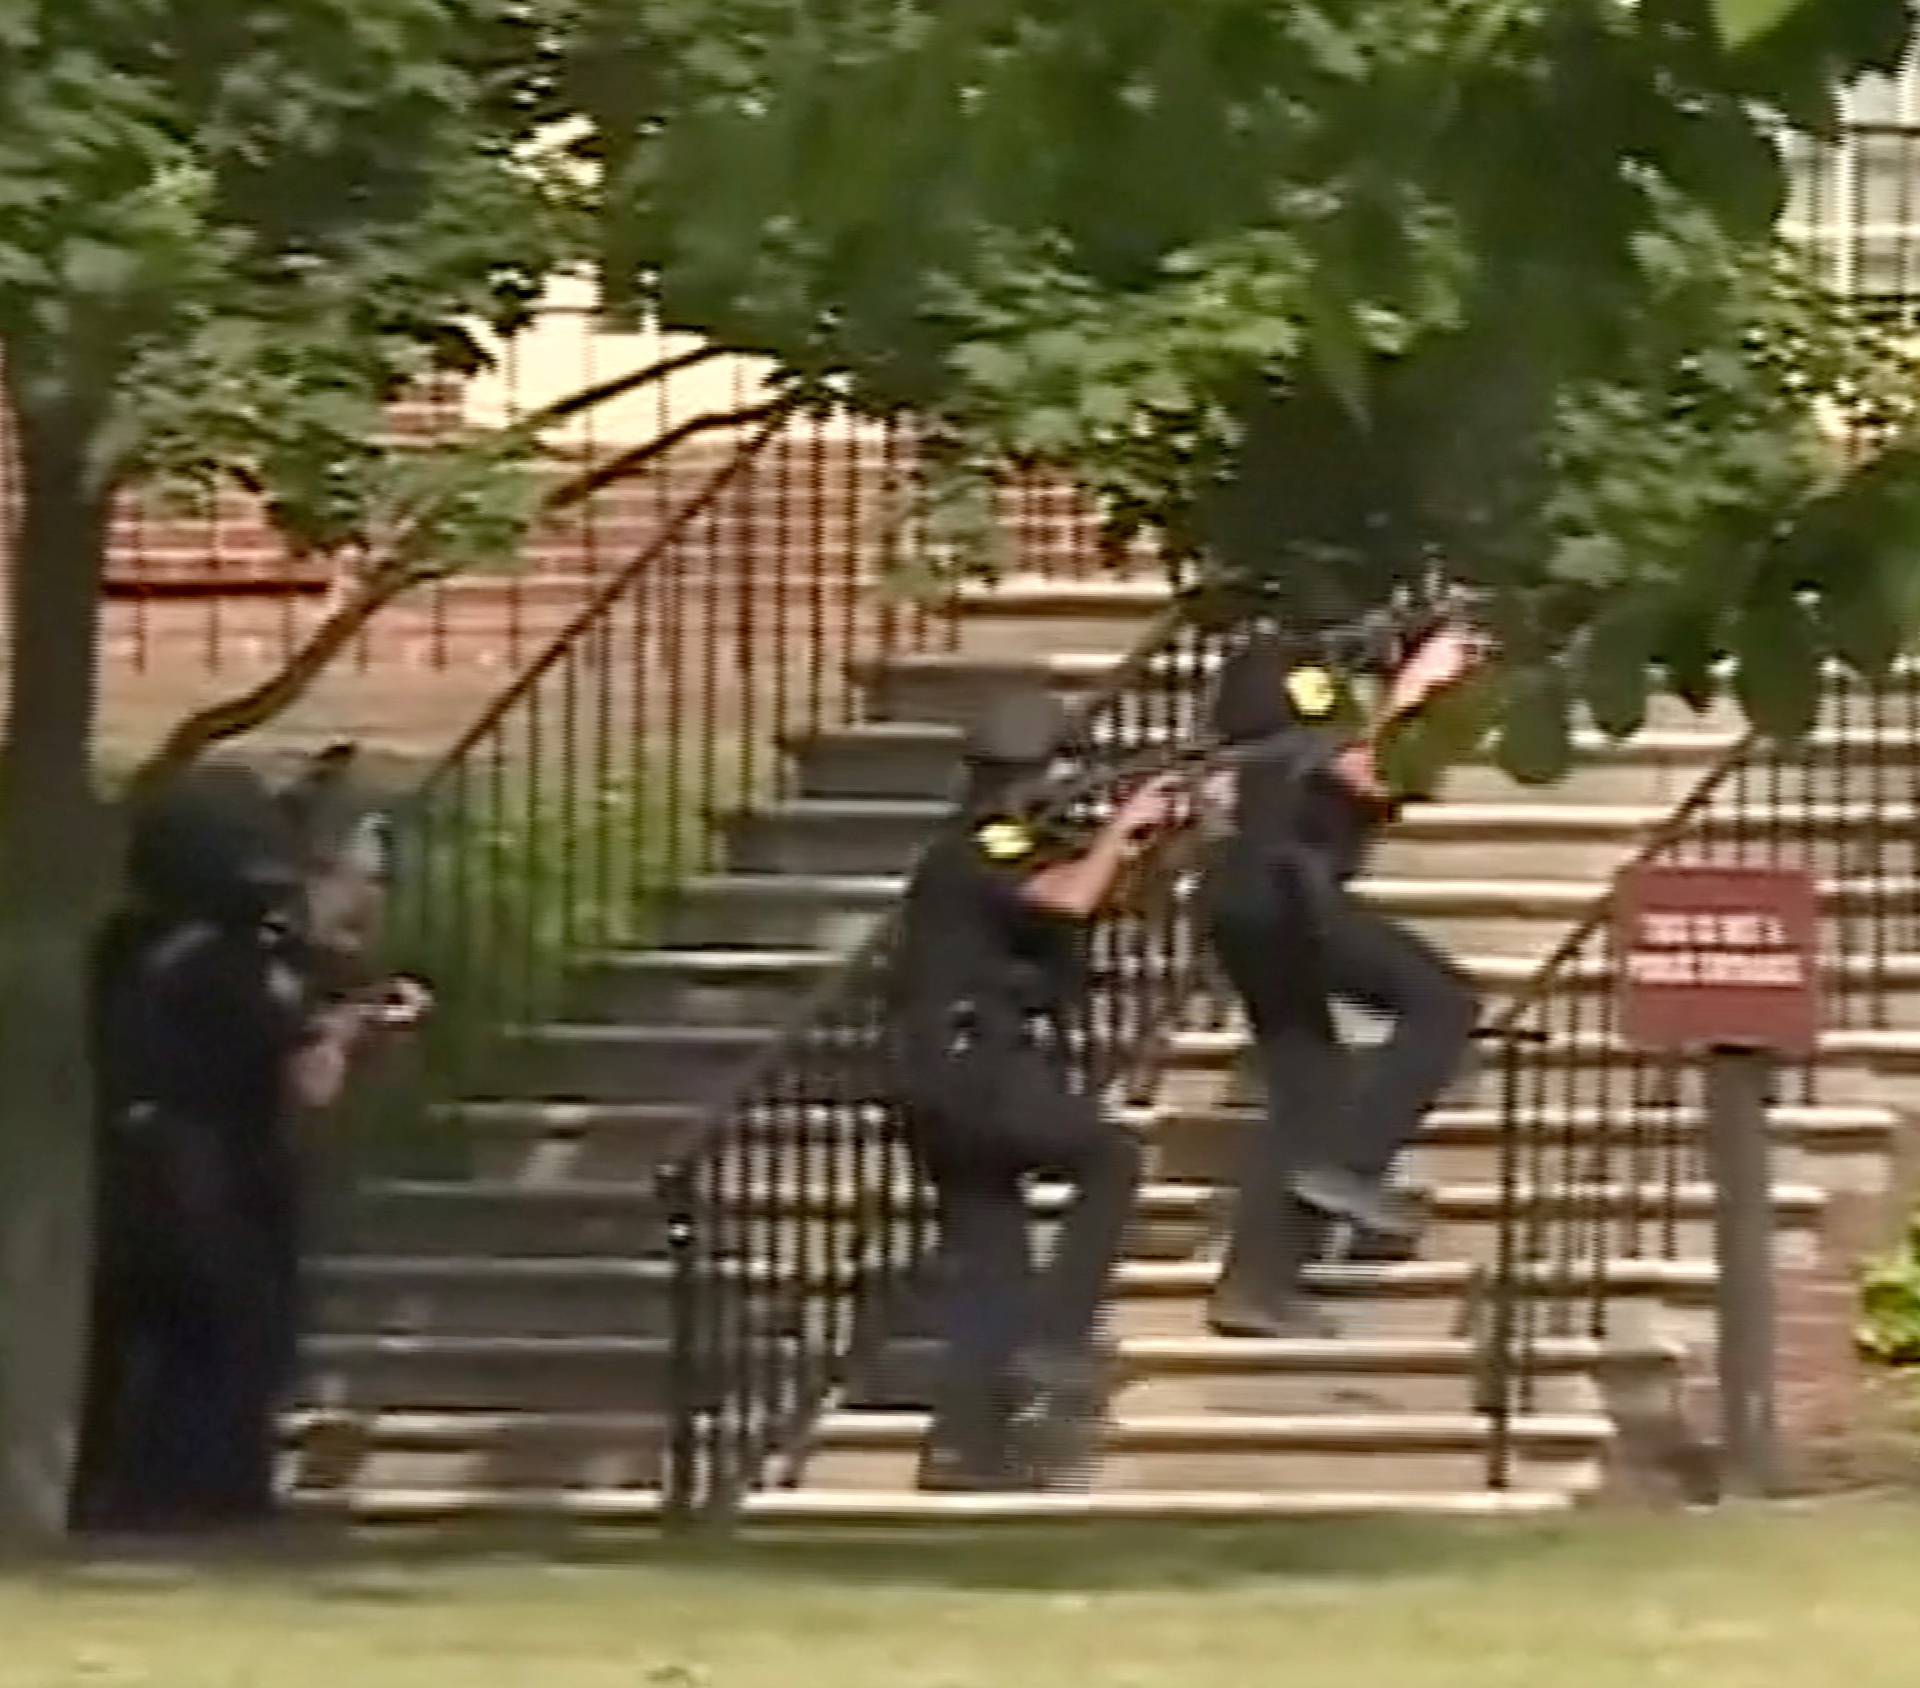 Police enter a building in this still image taken from video following a shooting incident at the municipal center in Virginia Beach